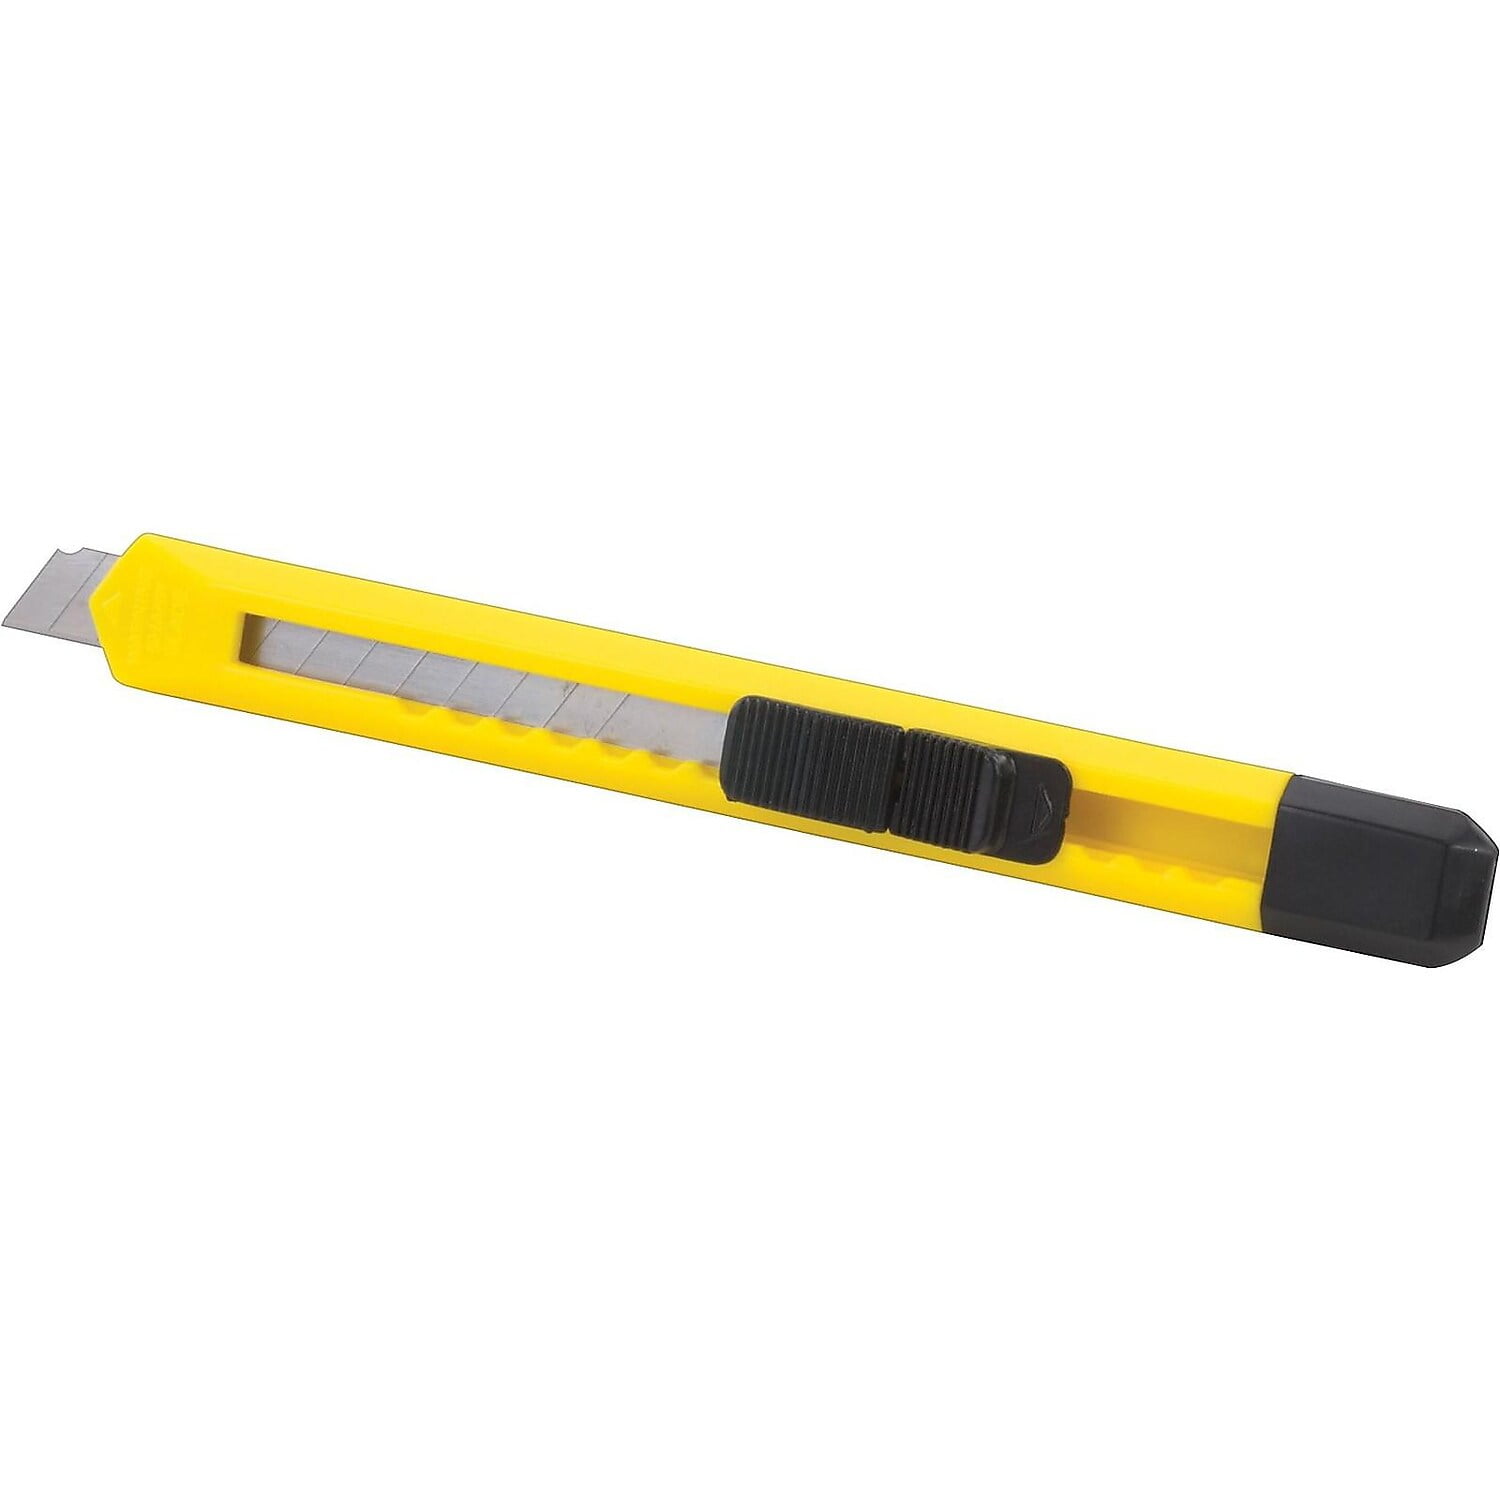 Stanley 0-10-481 Snap Off knife with magazine, Silver/Yellow - Utility  Knives 